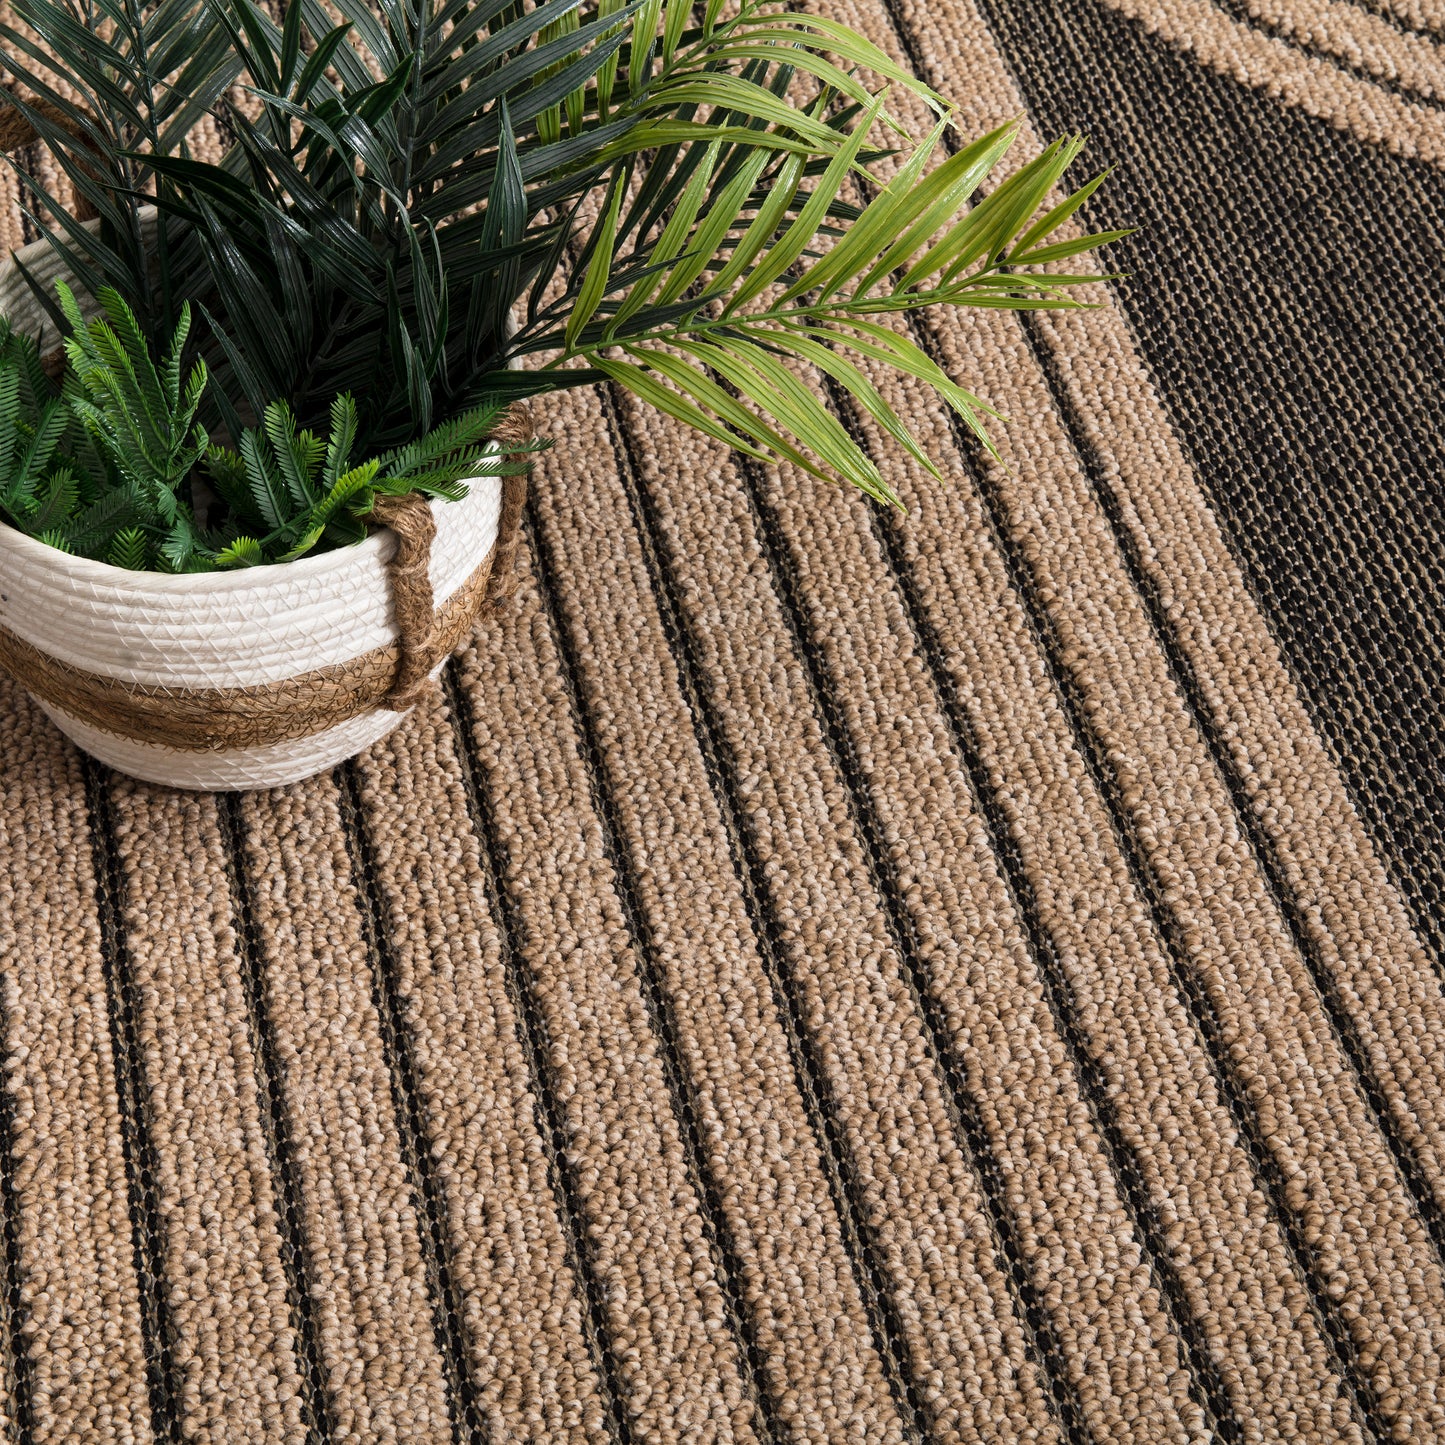 In- & Outdoor Rug Cologne with Modern Lines Design in Beige Black